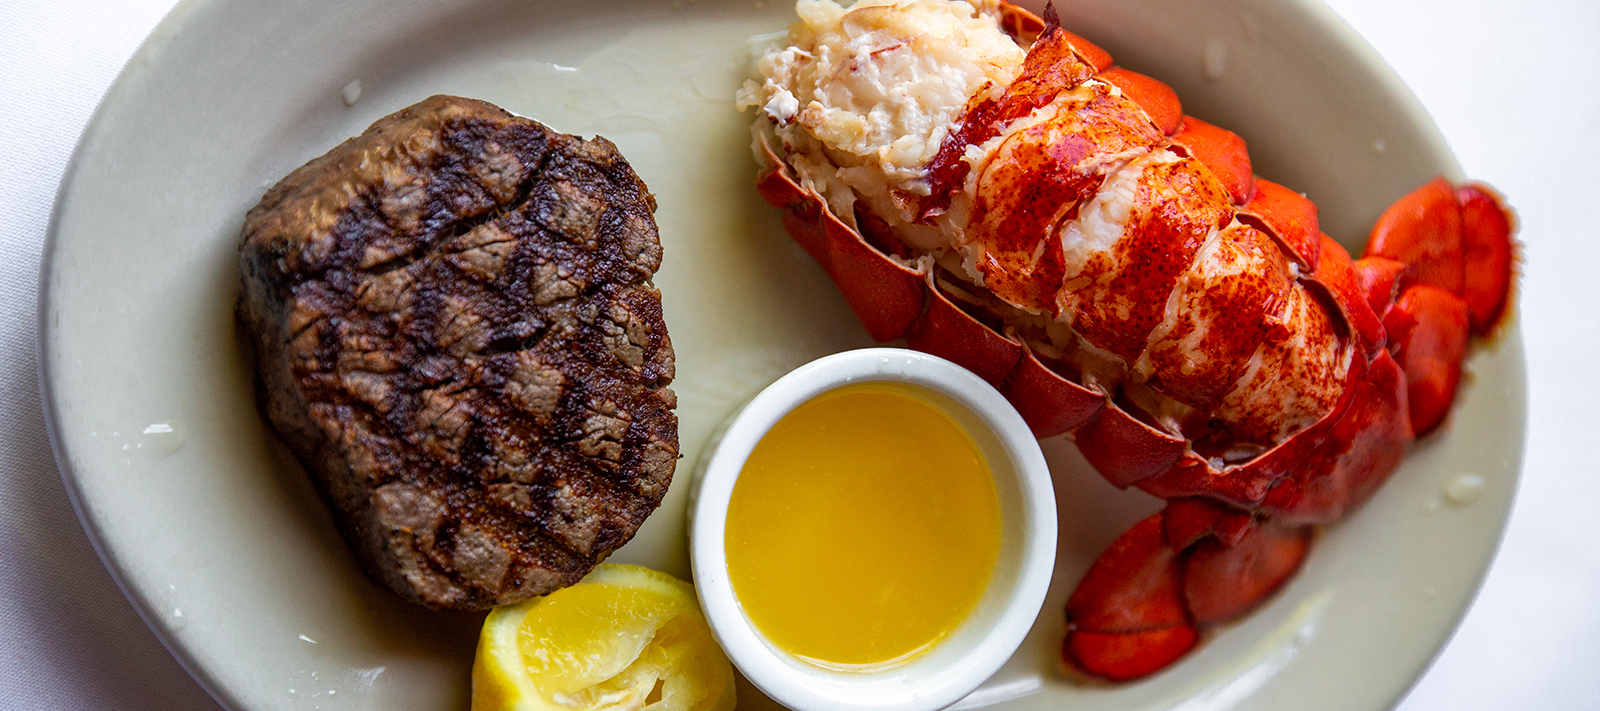 Surf & Turf at Keith Young's Steakhouse